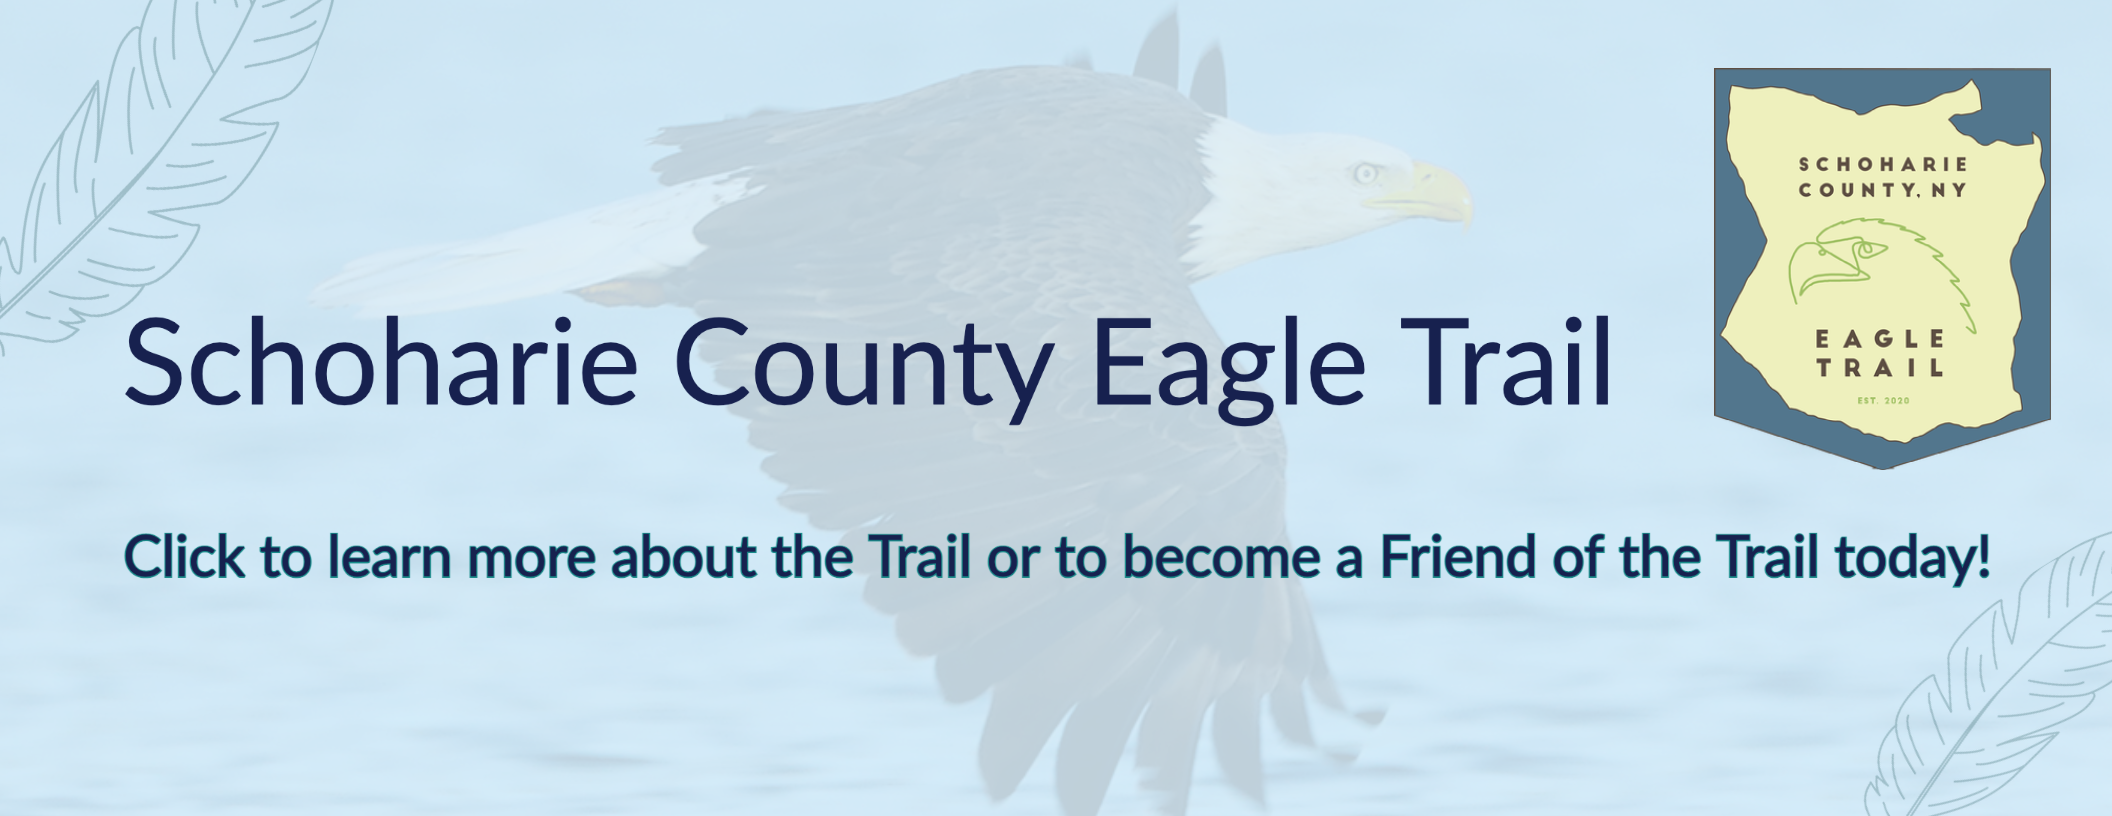 Become a Friend of the Trail Header-1 (1)